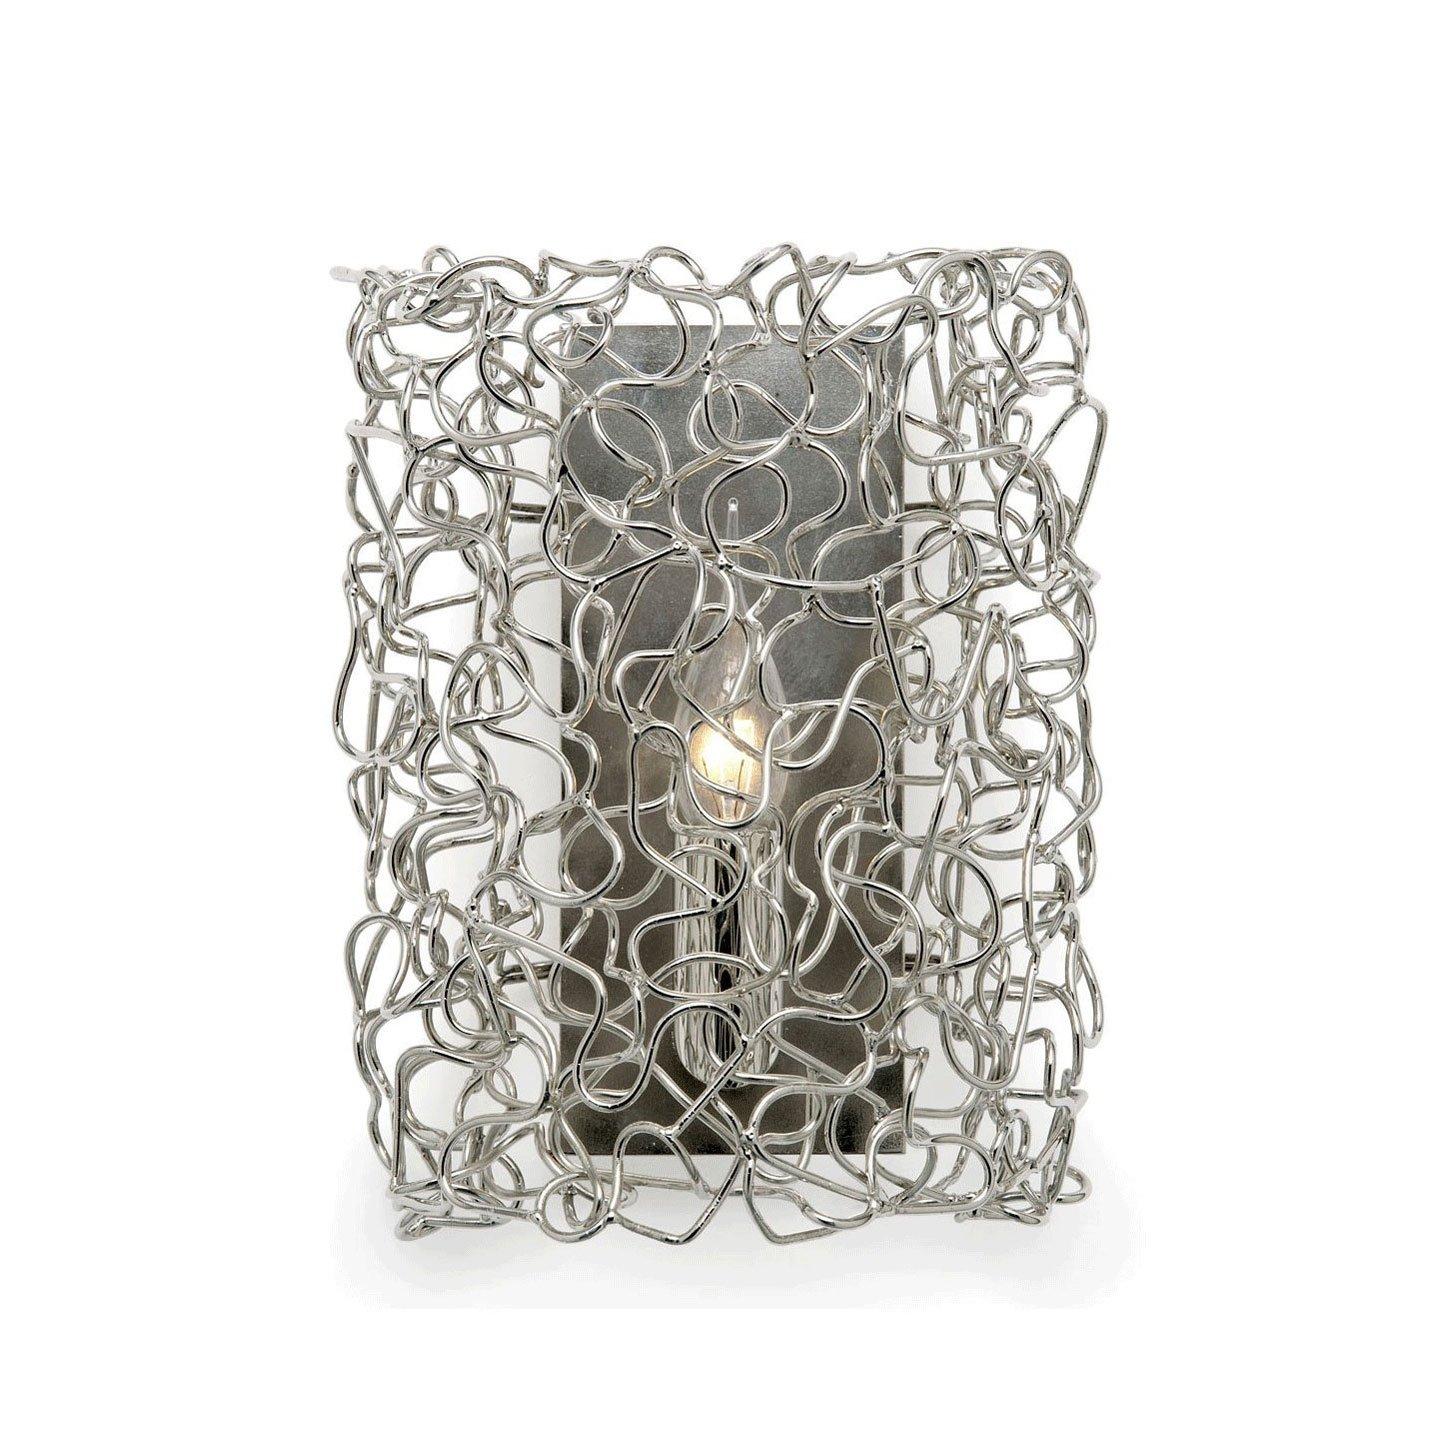 Crystal Waters Wall Sconce designed by Annet van Egmond & William Brand

Crystal Waters wall sconce features a hand-sculpted metal diffuser in a rectangle shape with intertwining nickel strands, creating a sparkling interplay of light and volume.